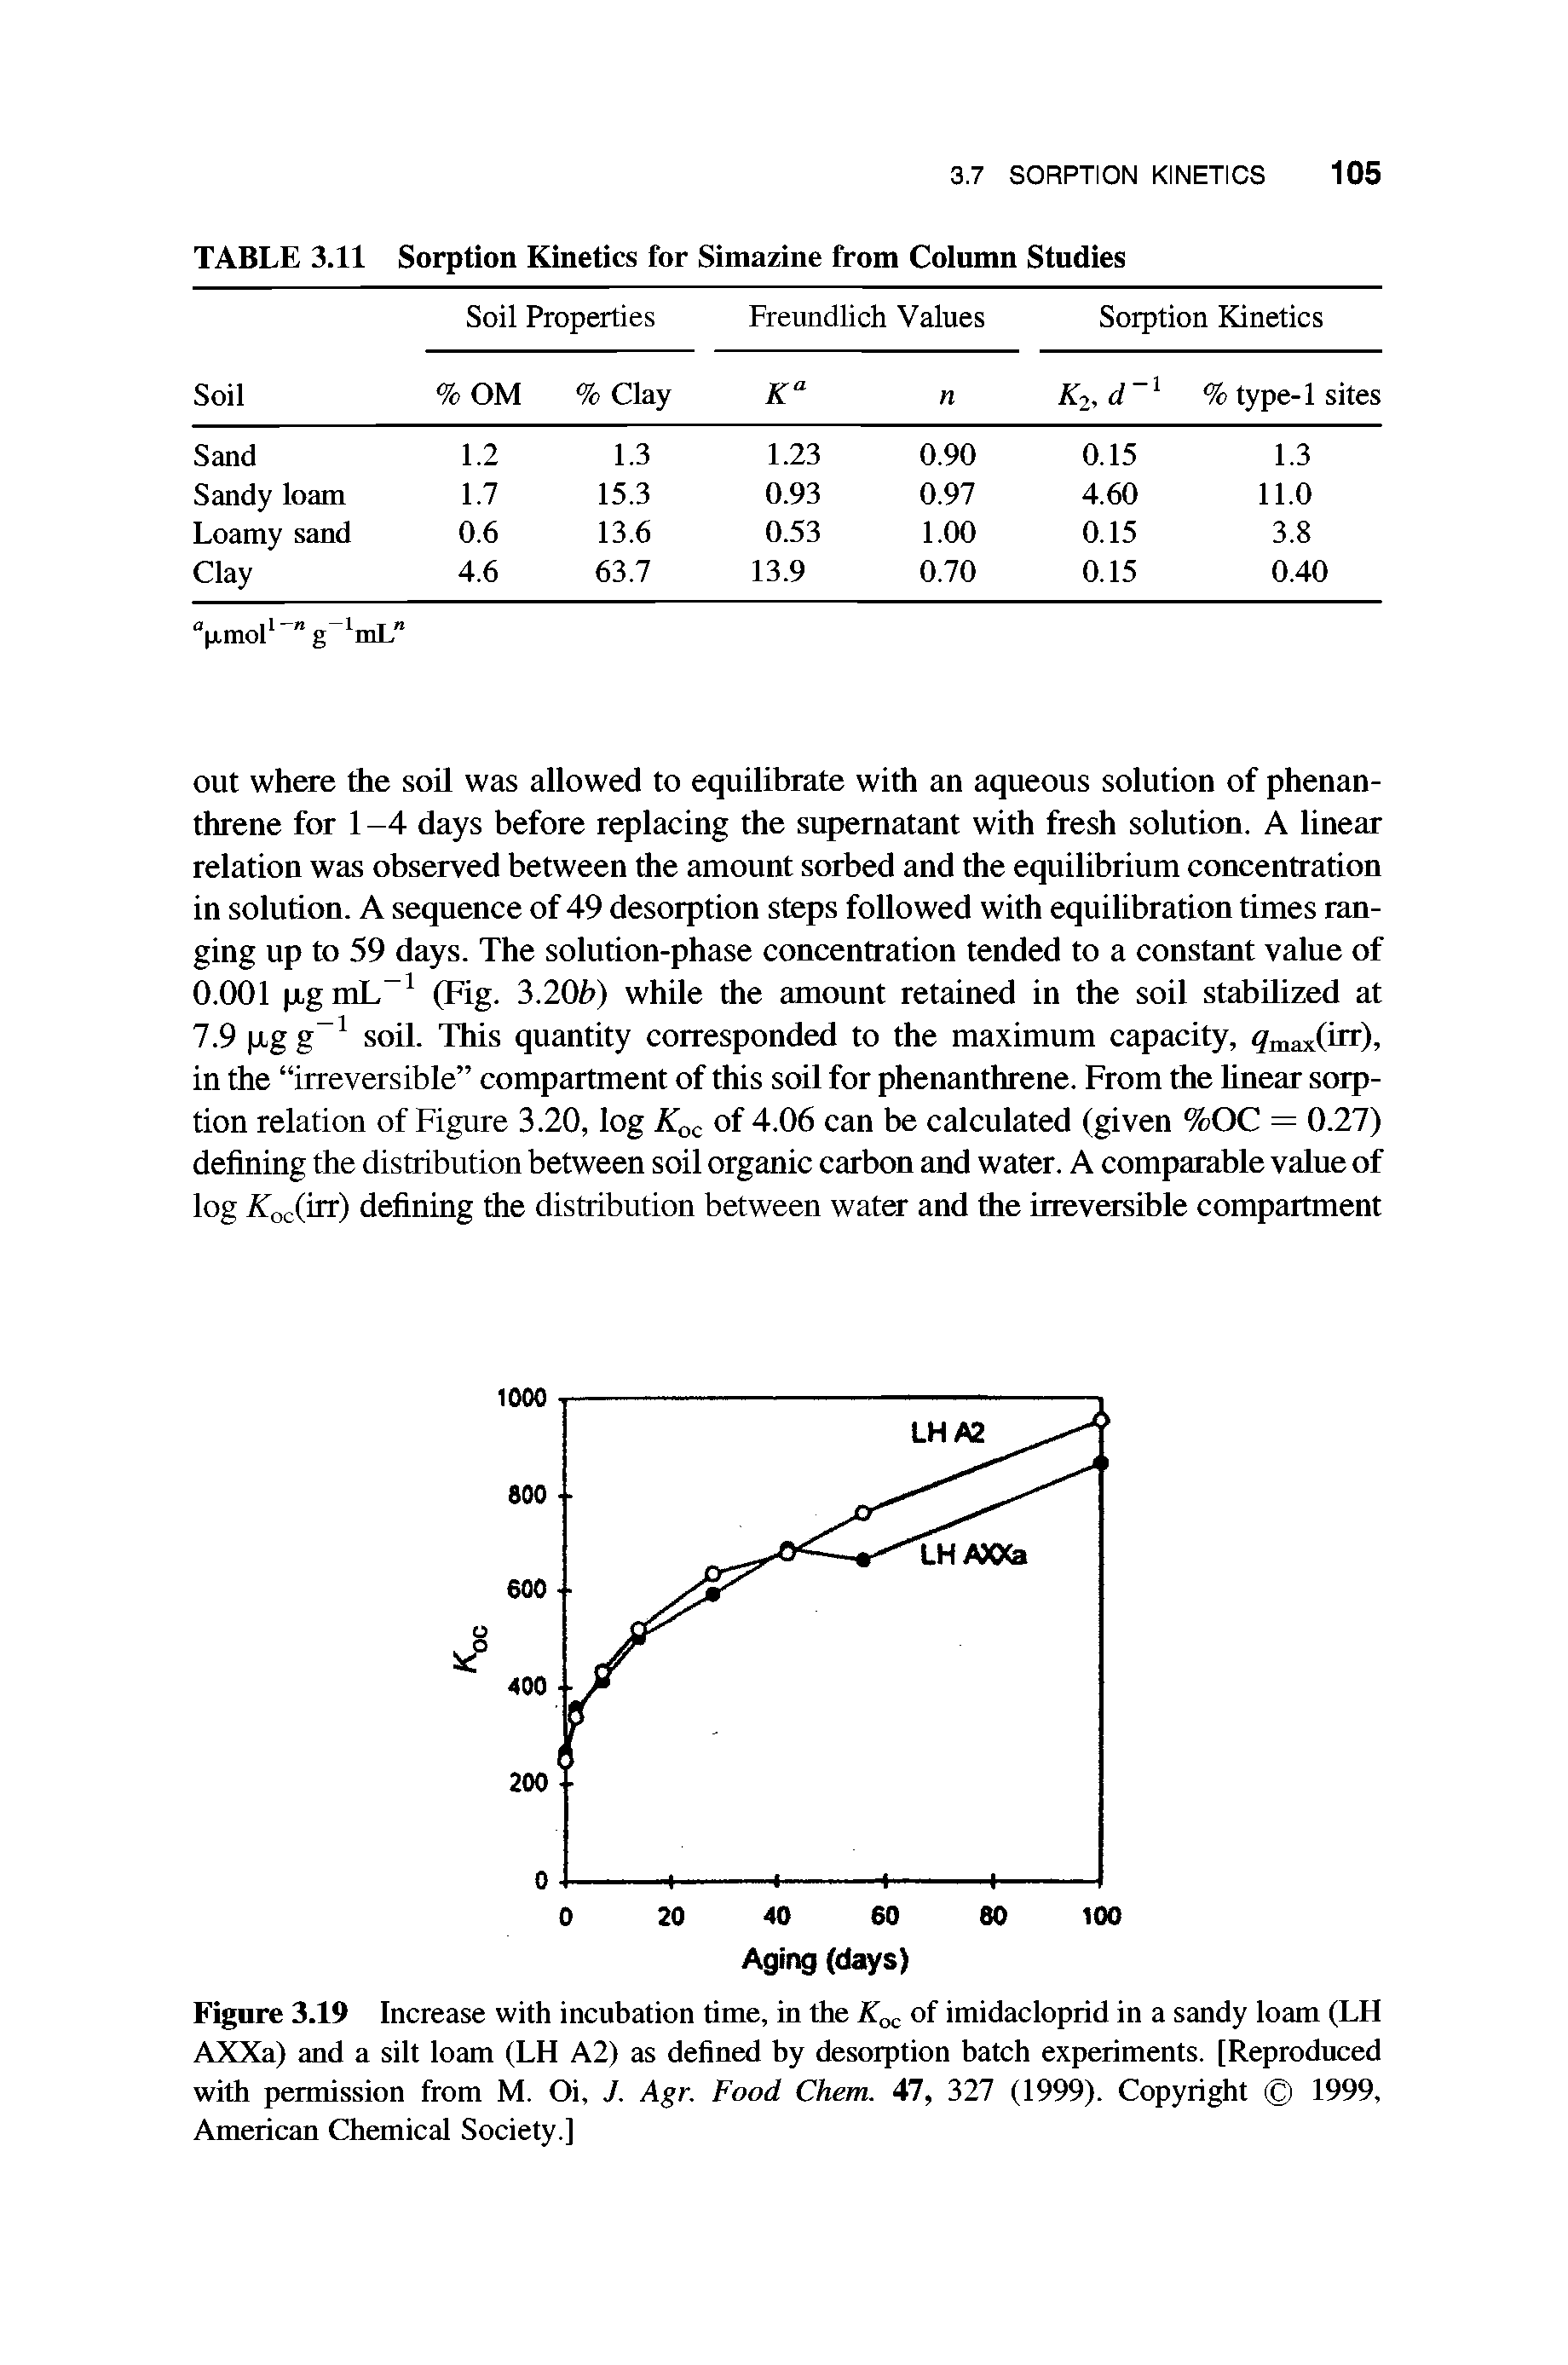 Figure 3.19 Increase with incubation time, in the Koc of imidacloprid in a sandy loam (LH AXXa) and a silt loam (LH A2) as defined by desorption batch experiments. [Reproduced with permission from M. Oi, J. Agr. Food Chem. 47, 327 (1999). Copyright 1999, American Chemical Society.]...